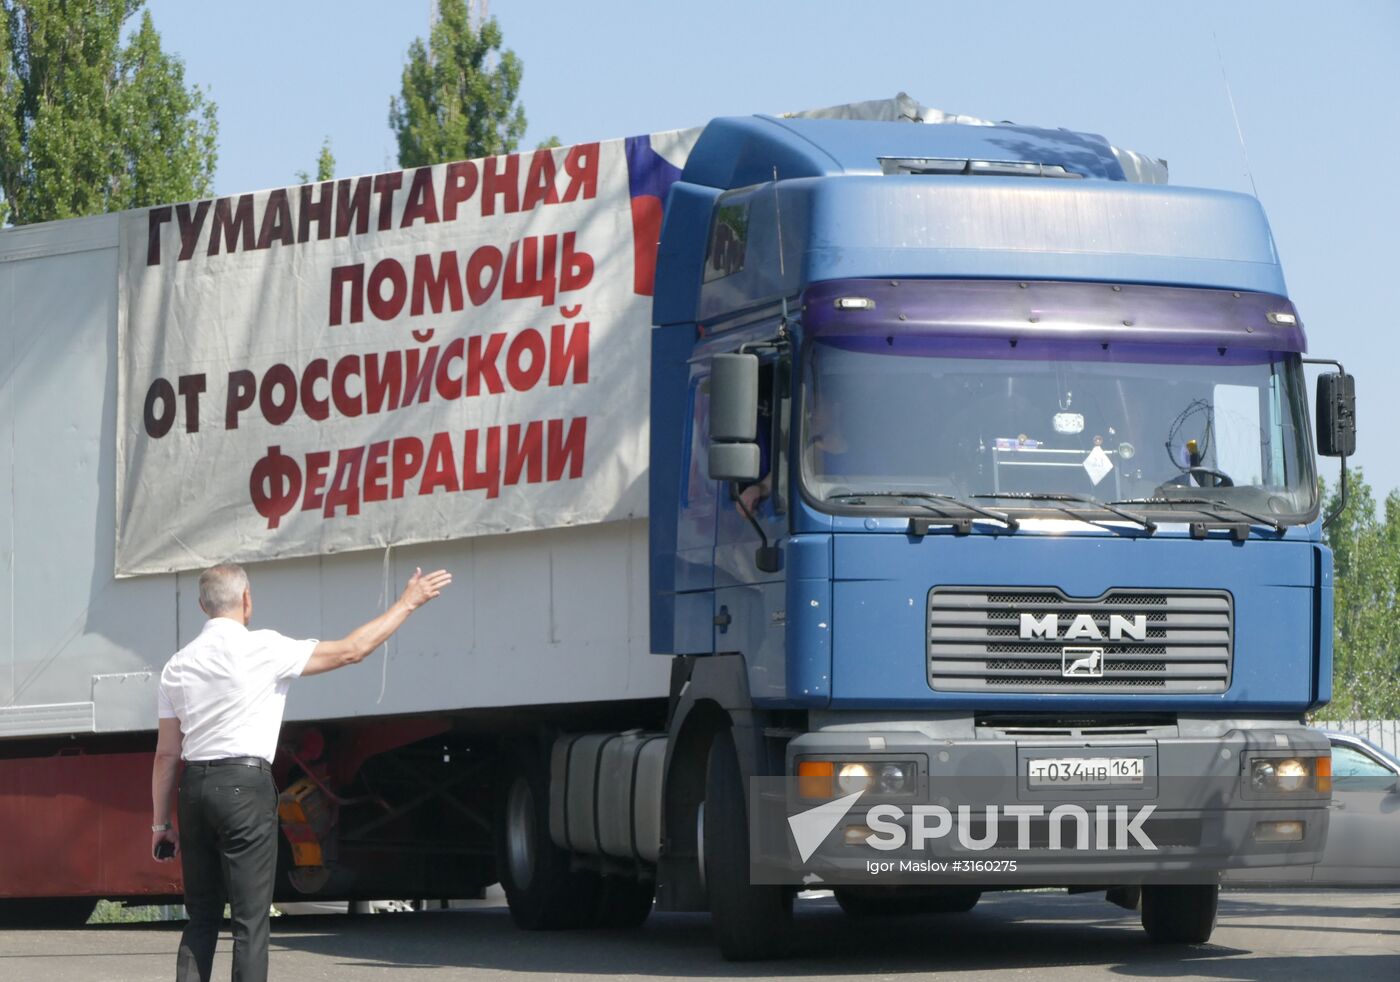 Russia's humanitarian aid convoy arrives in Donetsk